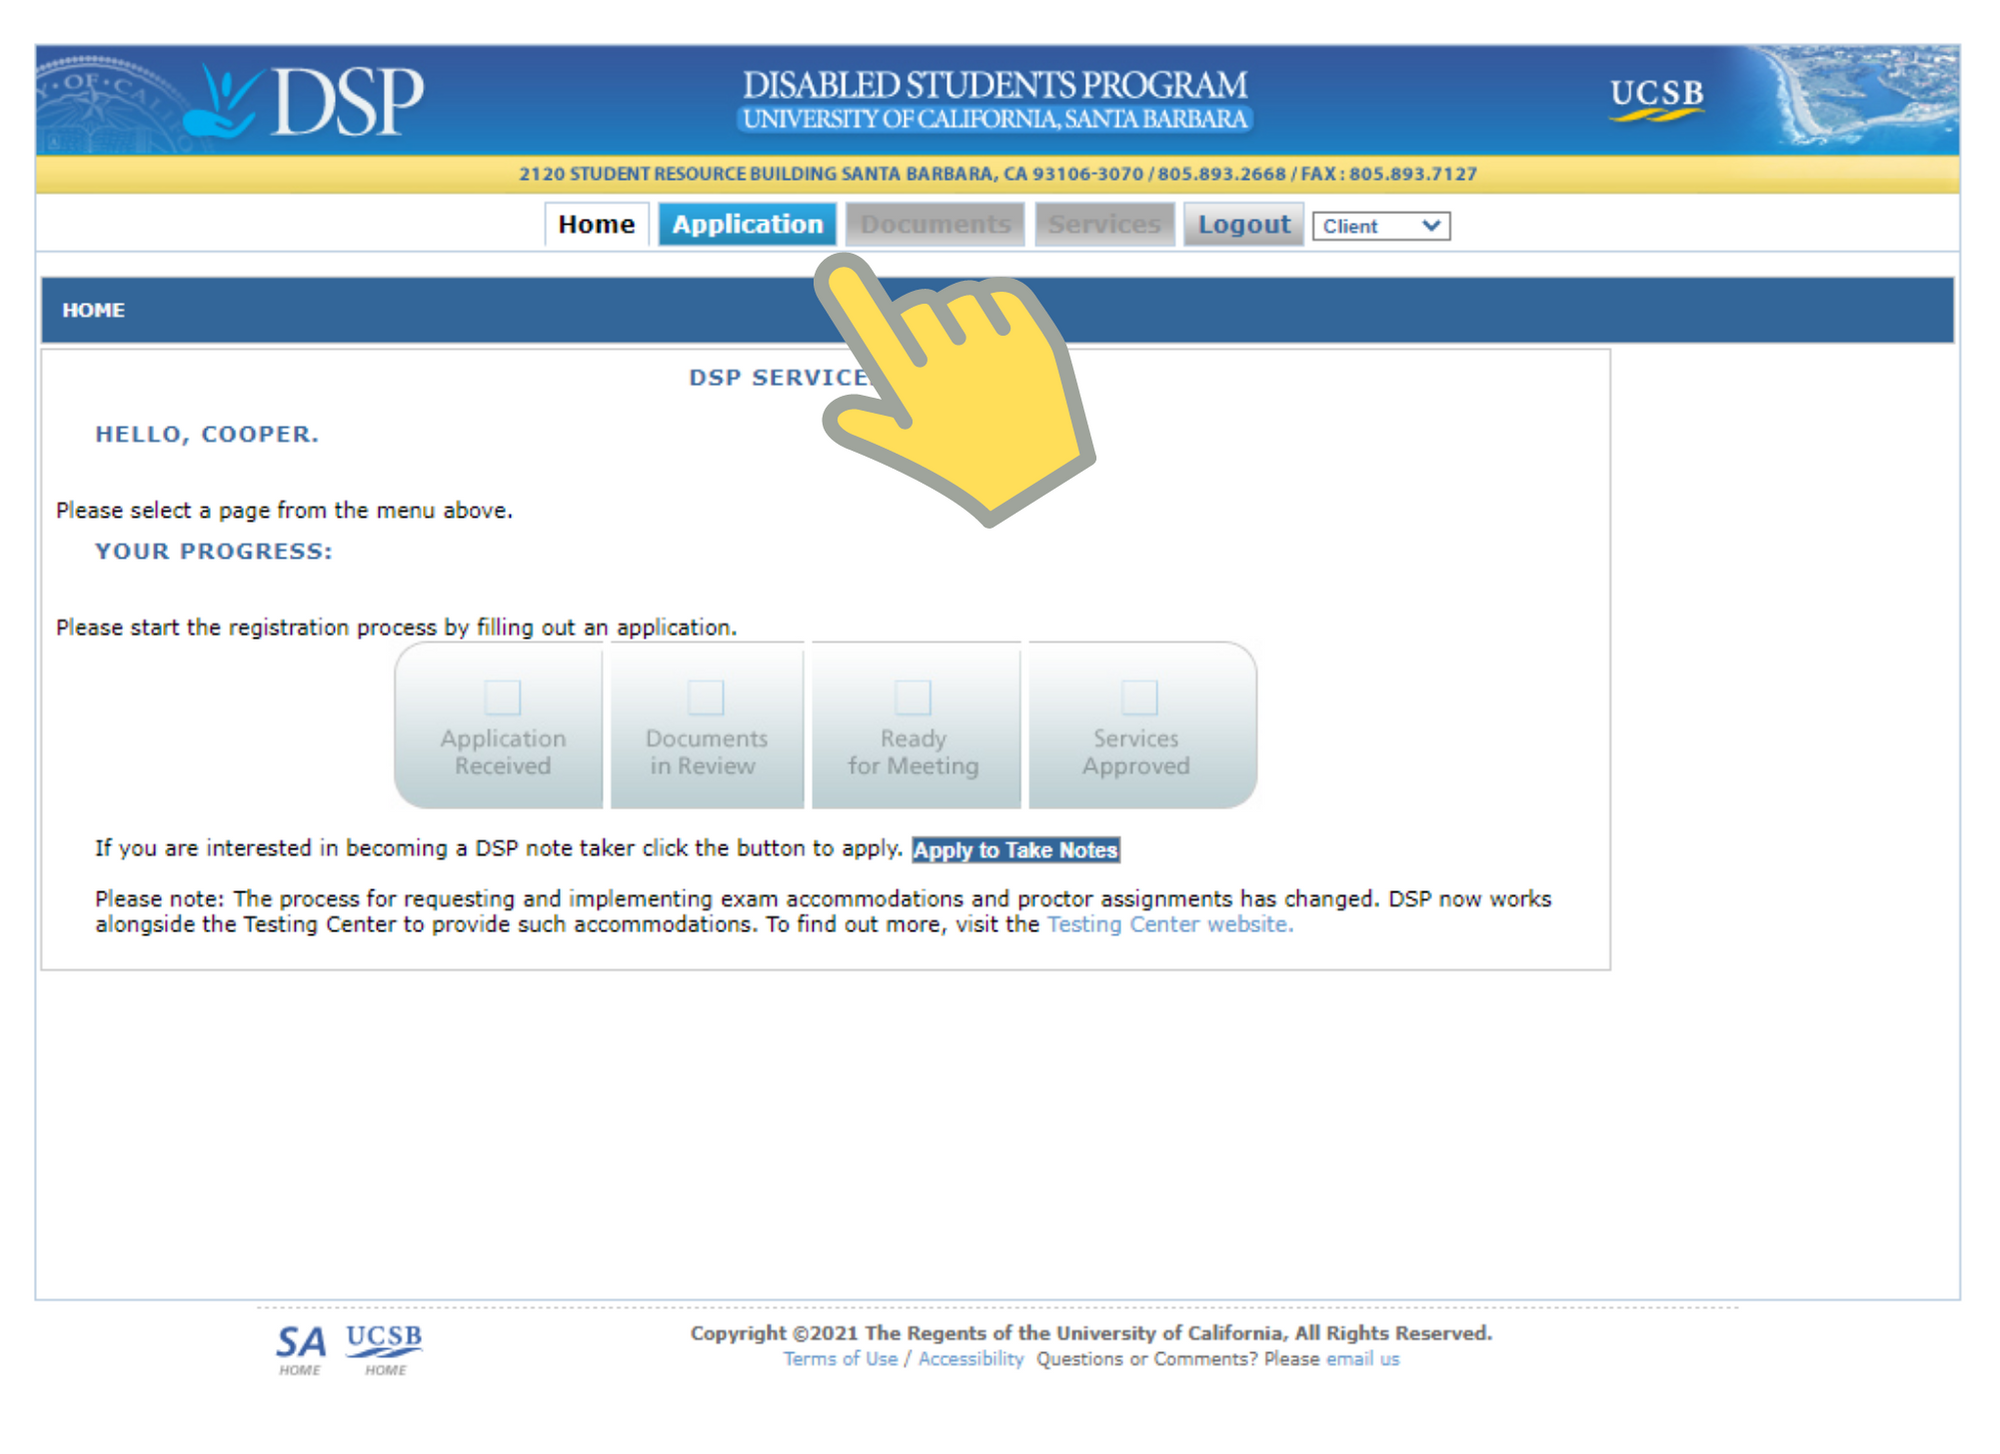 Hand pointing to Application tab on DSP portal interface.